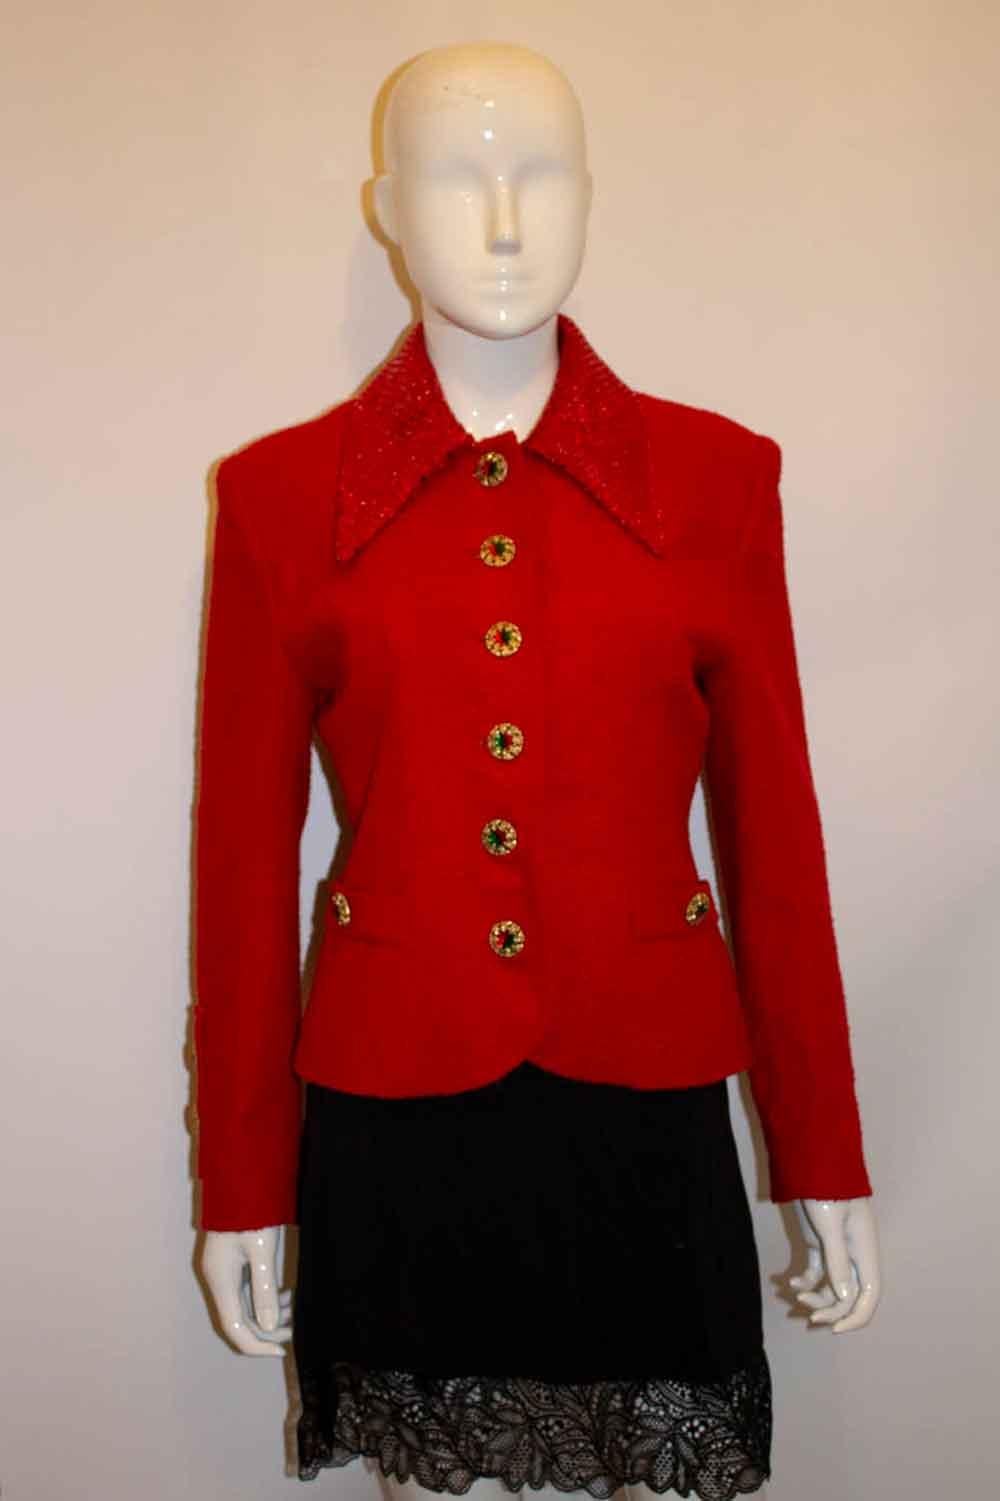 A wonderful jacket for the festive season. The red jacket  has a sequin dagger collar ,  and stunning buttons in red and green.  Measurements Bust up to 36'', length 21''